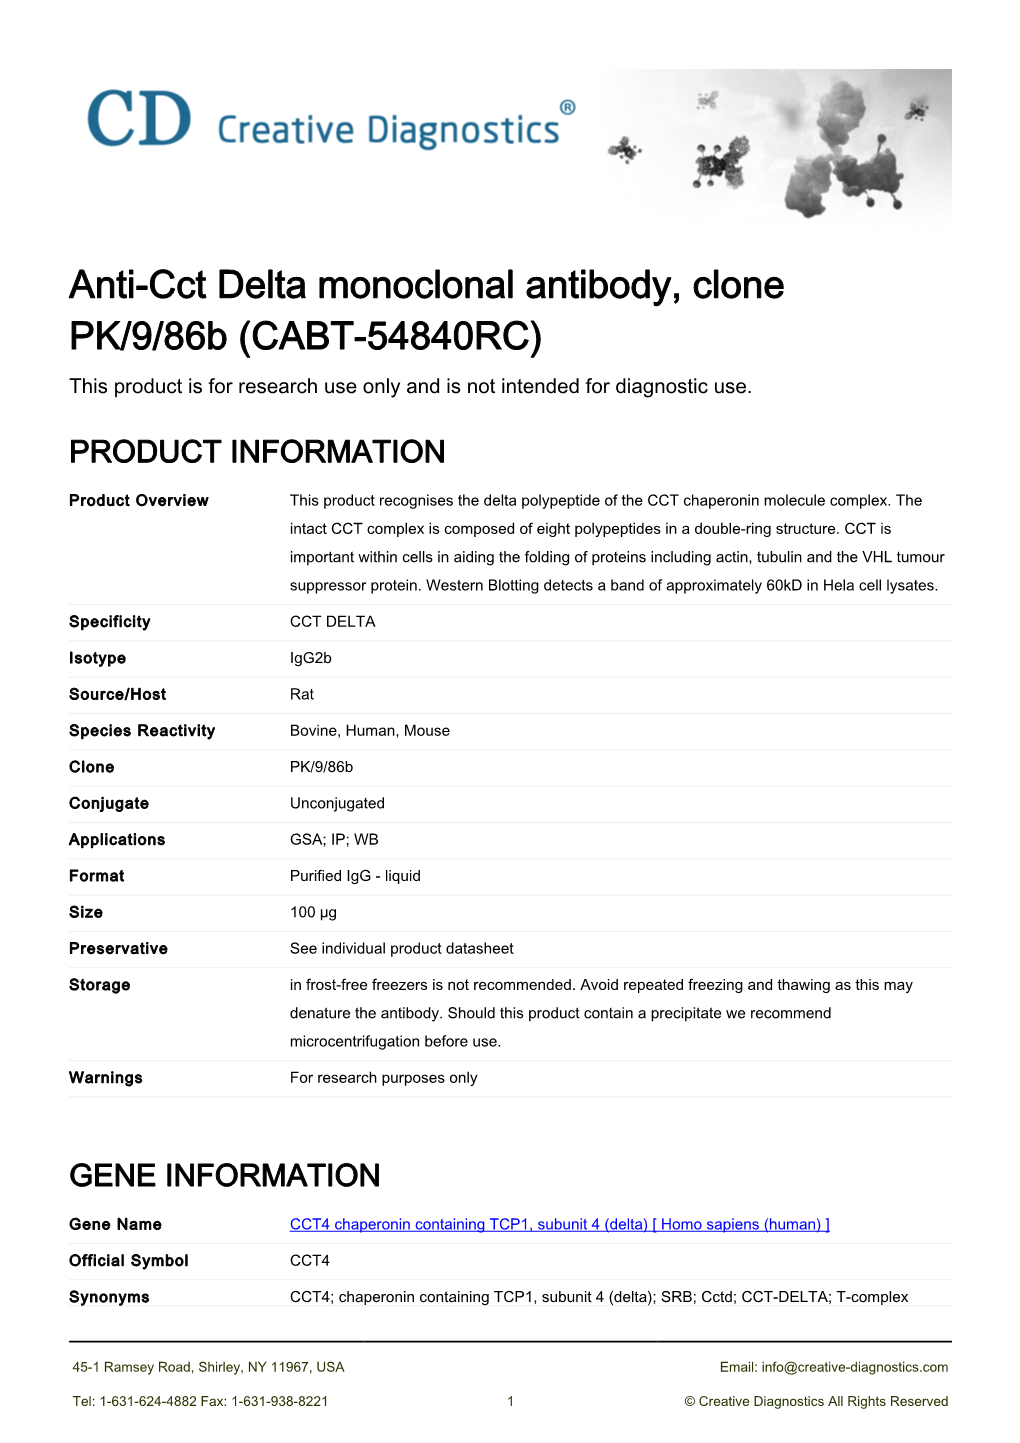 Anti-Cct Delta Monoclonal Antibody, Clone PK/9/86B (CABT-54840RC) This Product Is for Research Use Only and Is Not Intended for Diagnostic Use